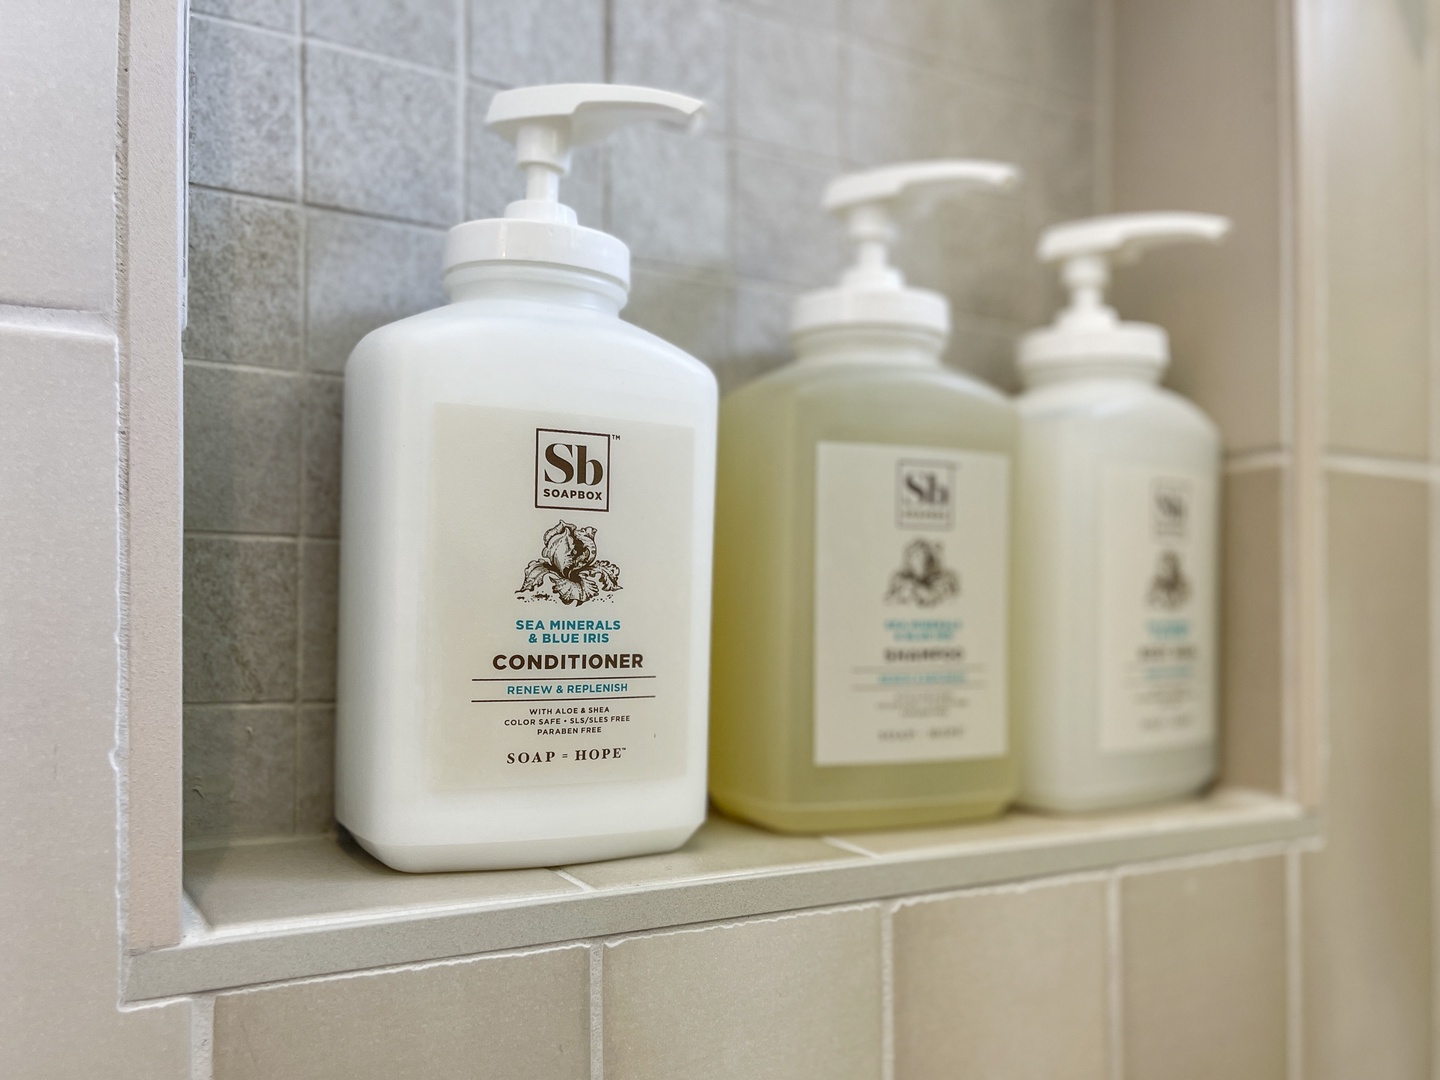 Bathrooms are stocked with items including: shampoo, conditioner, body wash, and fresh towels.